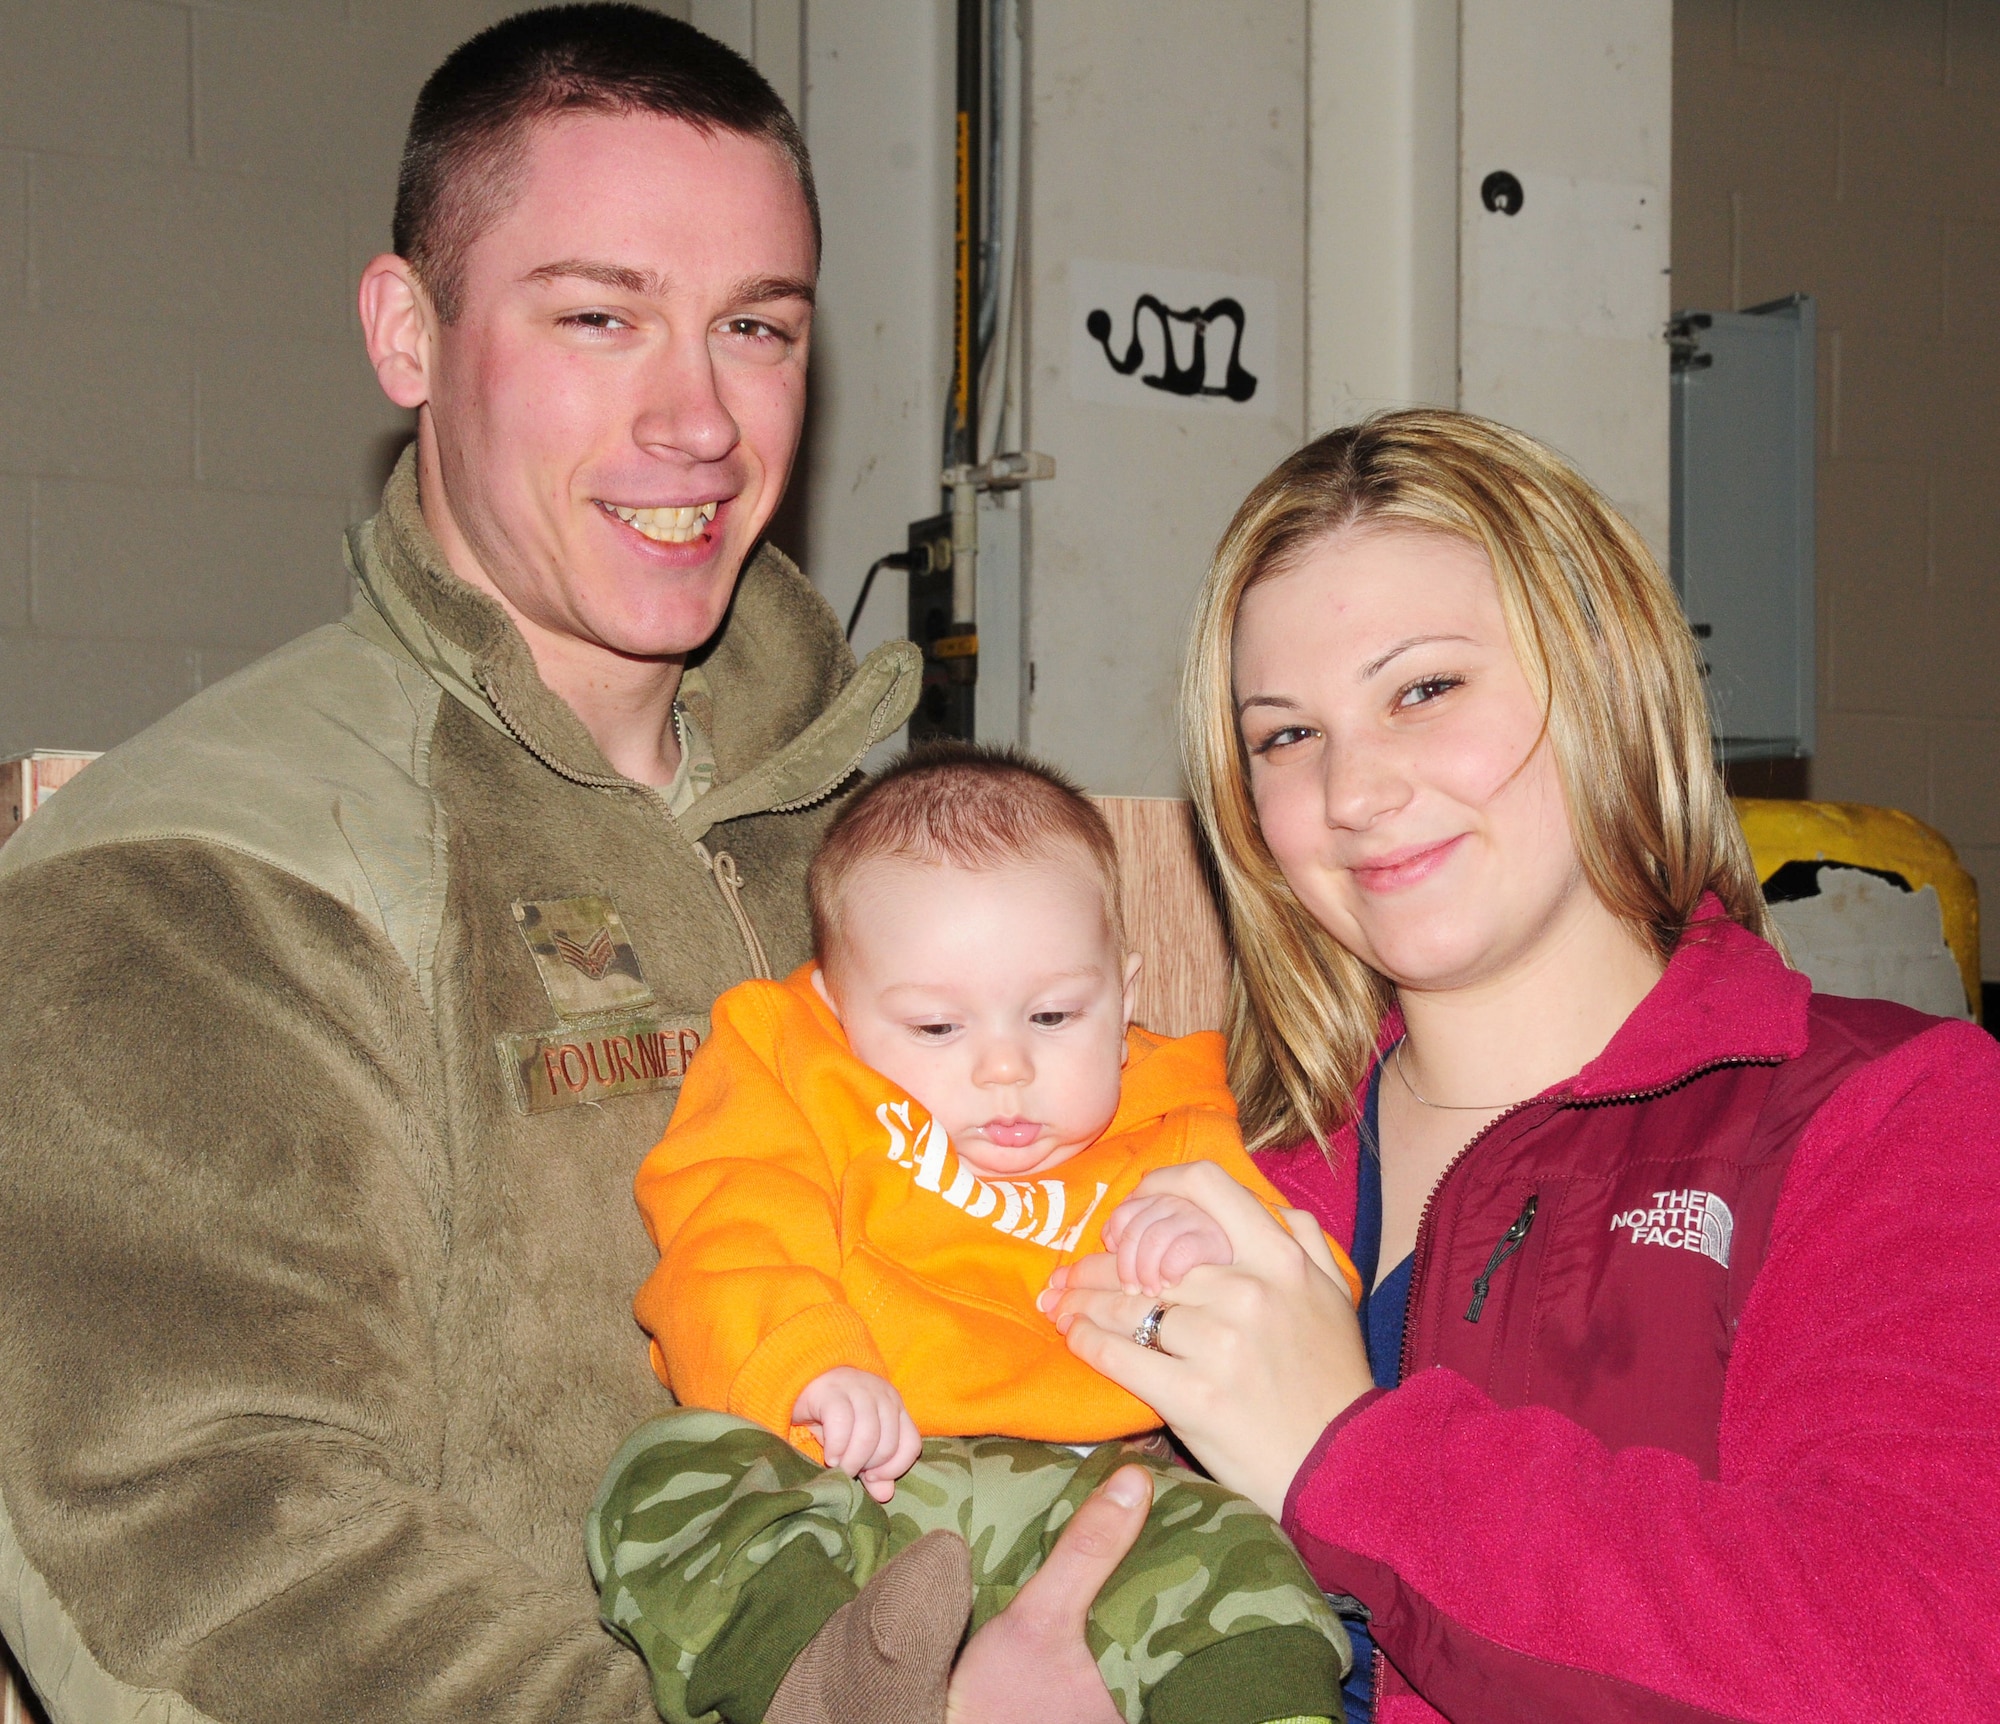 Senior Airman Daniel Fournier, 103rd Security Forces Squadron, greets his son, Hunter, and wife, Angela upon his return home from Afghanistan at Bradley Air National Guard Base, East Granby, Conn., Jan. 30, 2012. Hunter was born during Fournier's six-month deployment to Bagram Airfield where he performed security and patrol operations. (U.S. Air Force photo by Tech. Sgt. Erin McNamara\RELEASED)